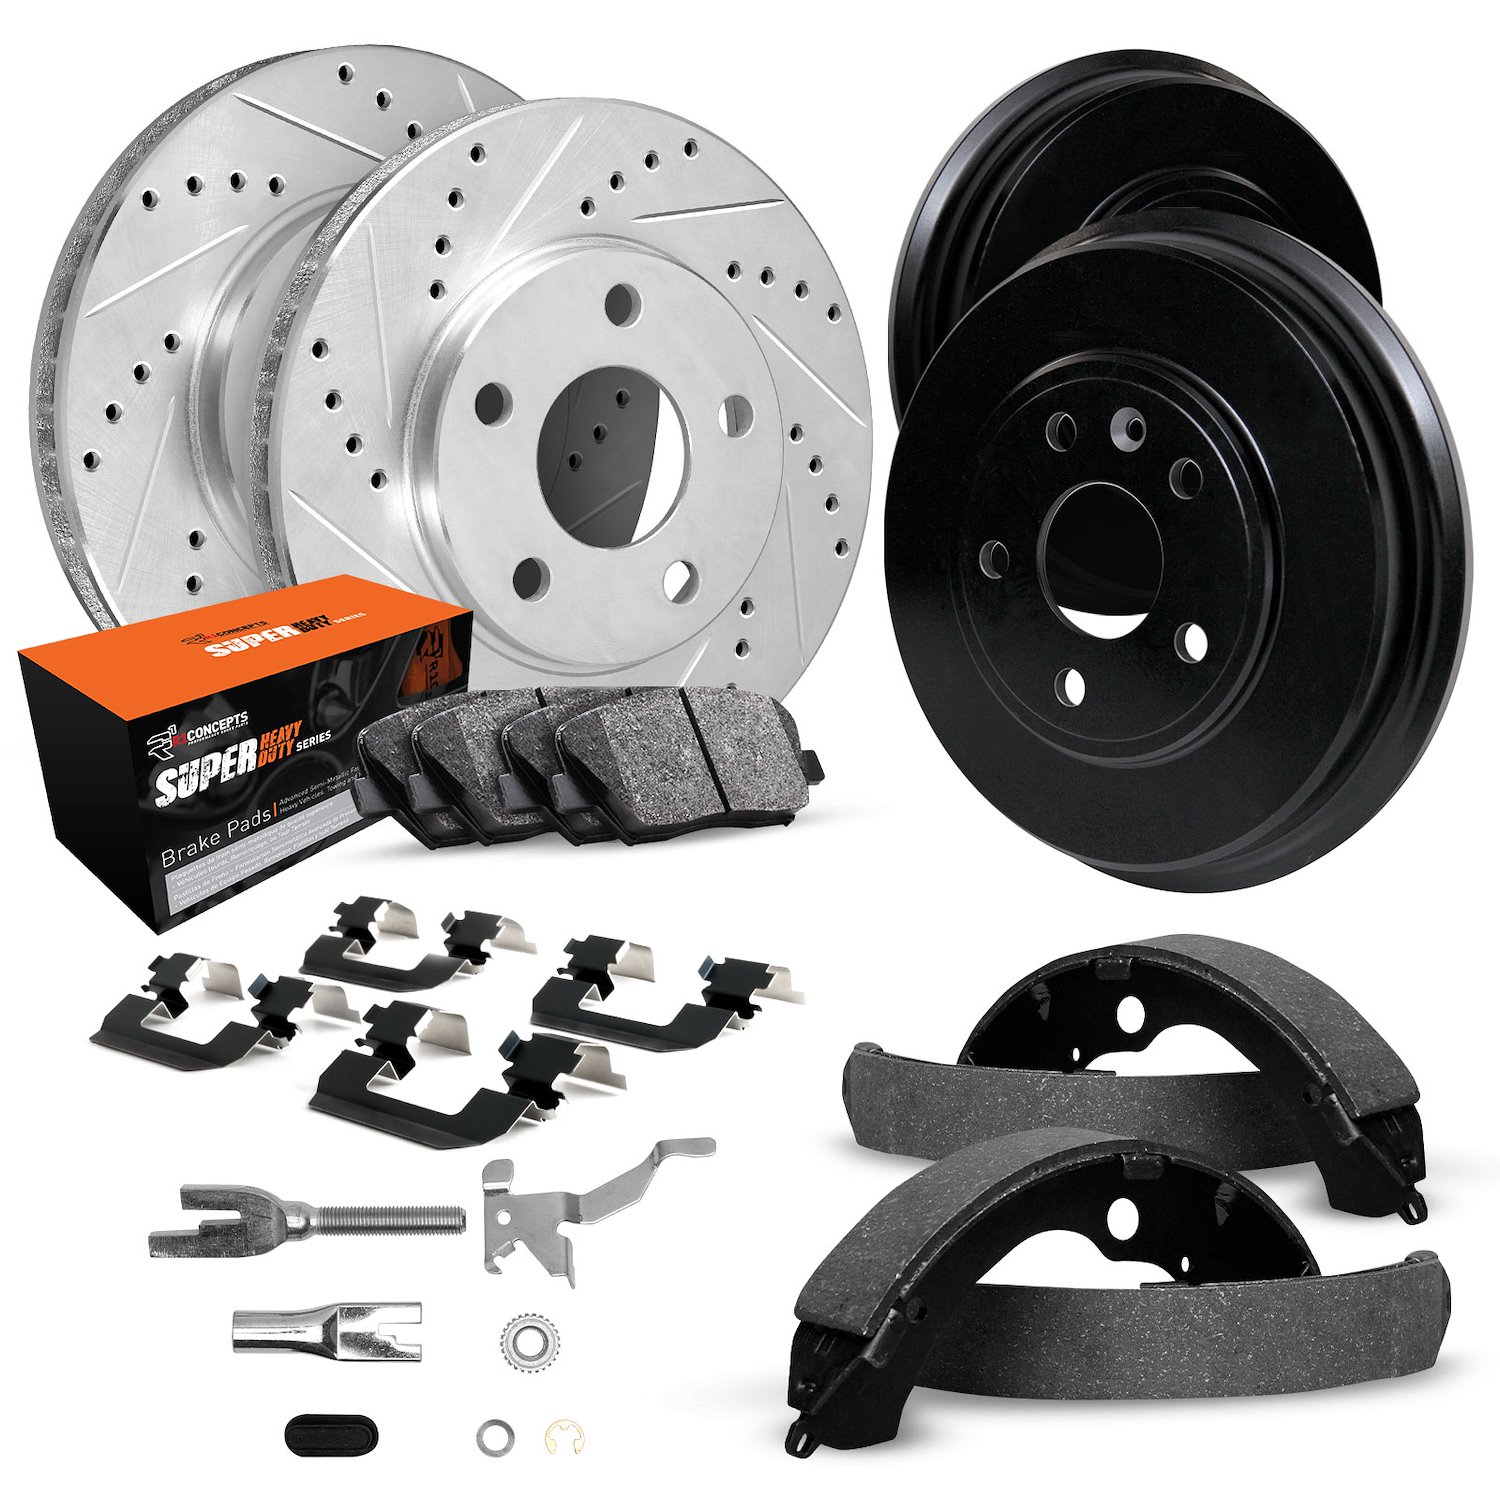 E-Line Drilled/Slotted Silver Rotor & Drum Set w/Super-Duty Pads, Shoes/Hardware/Adjusters, 2000-2002 Mopar